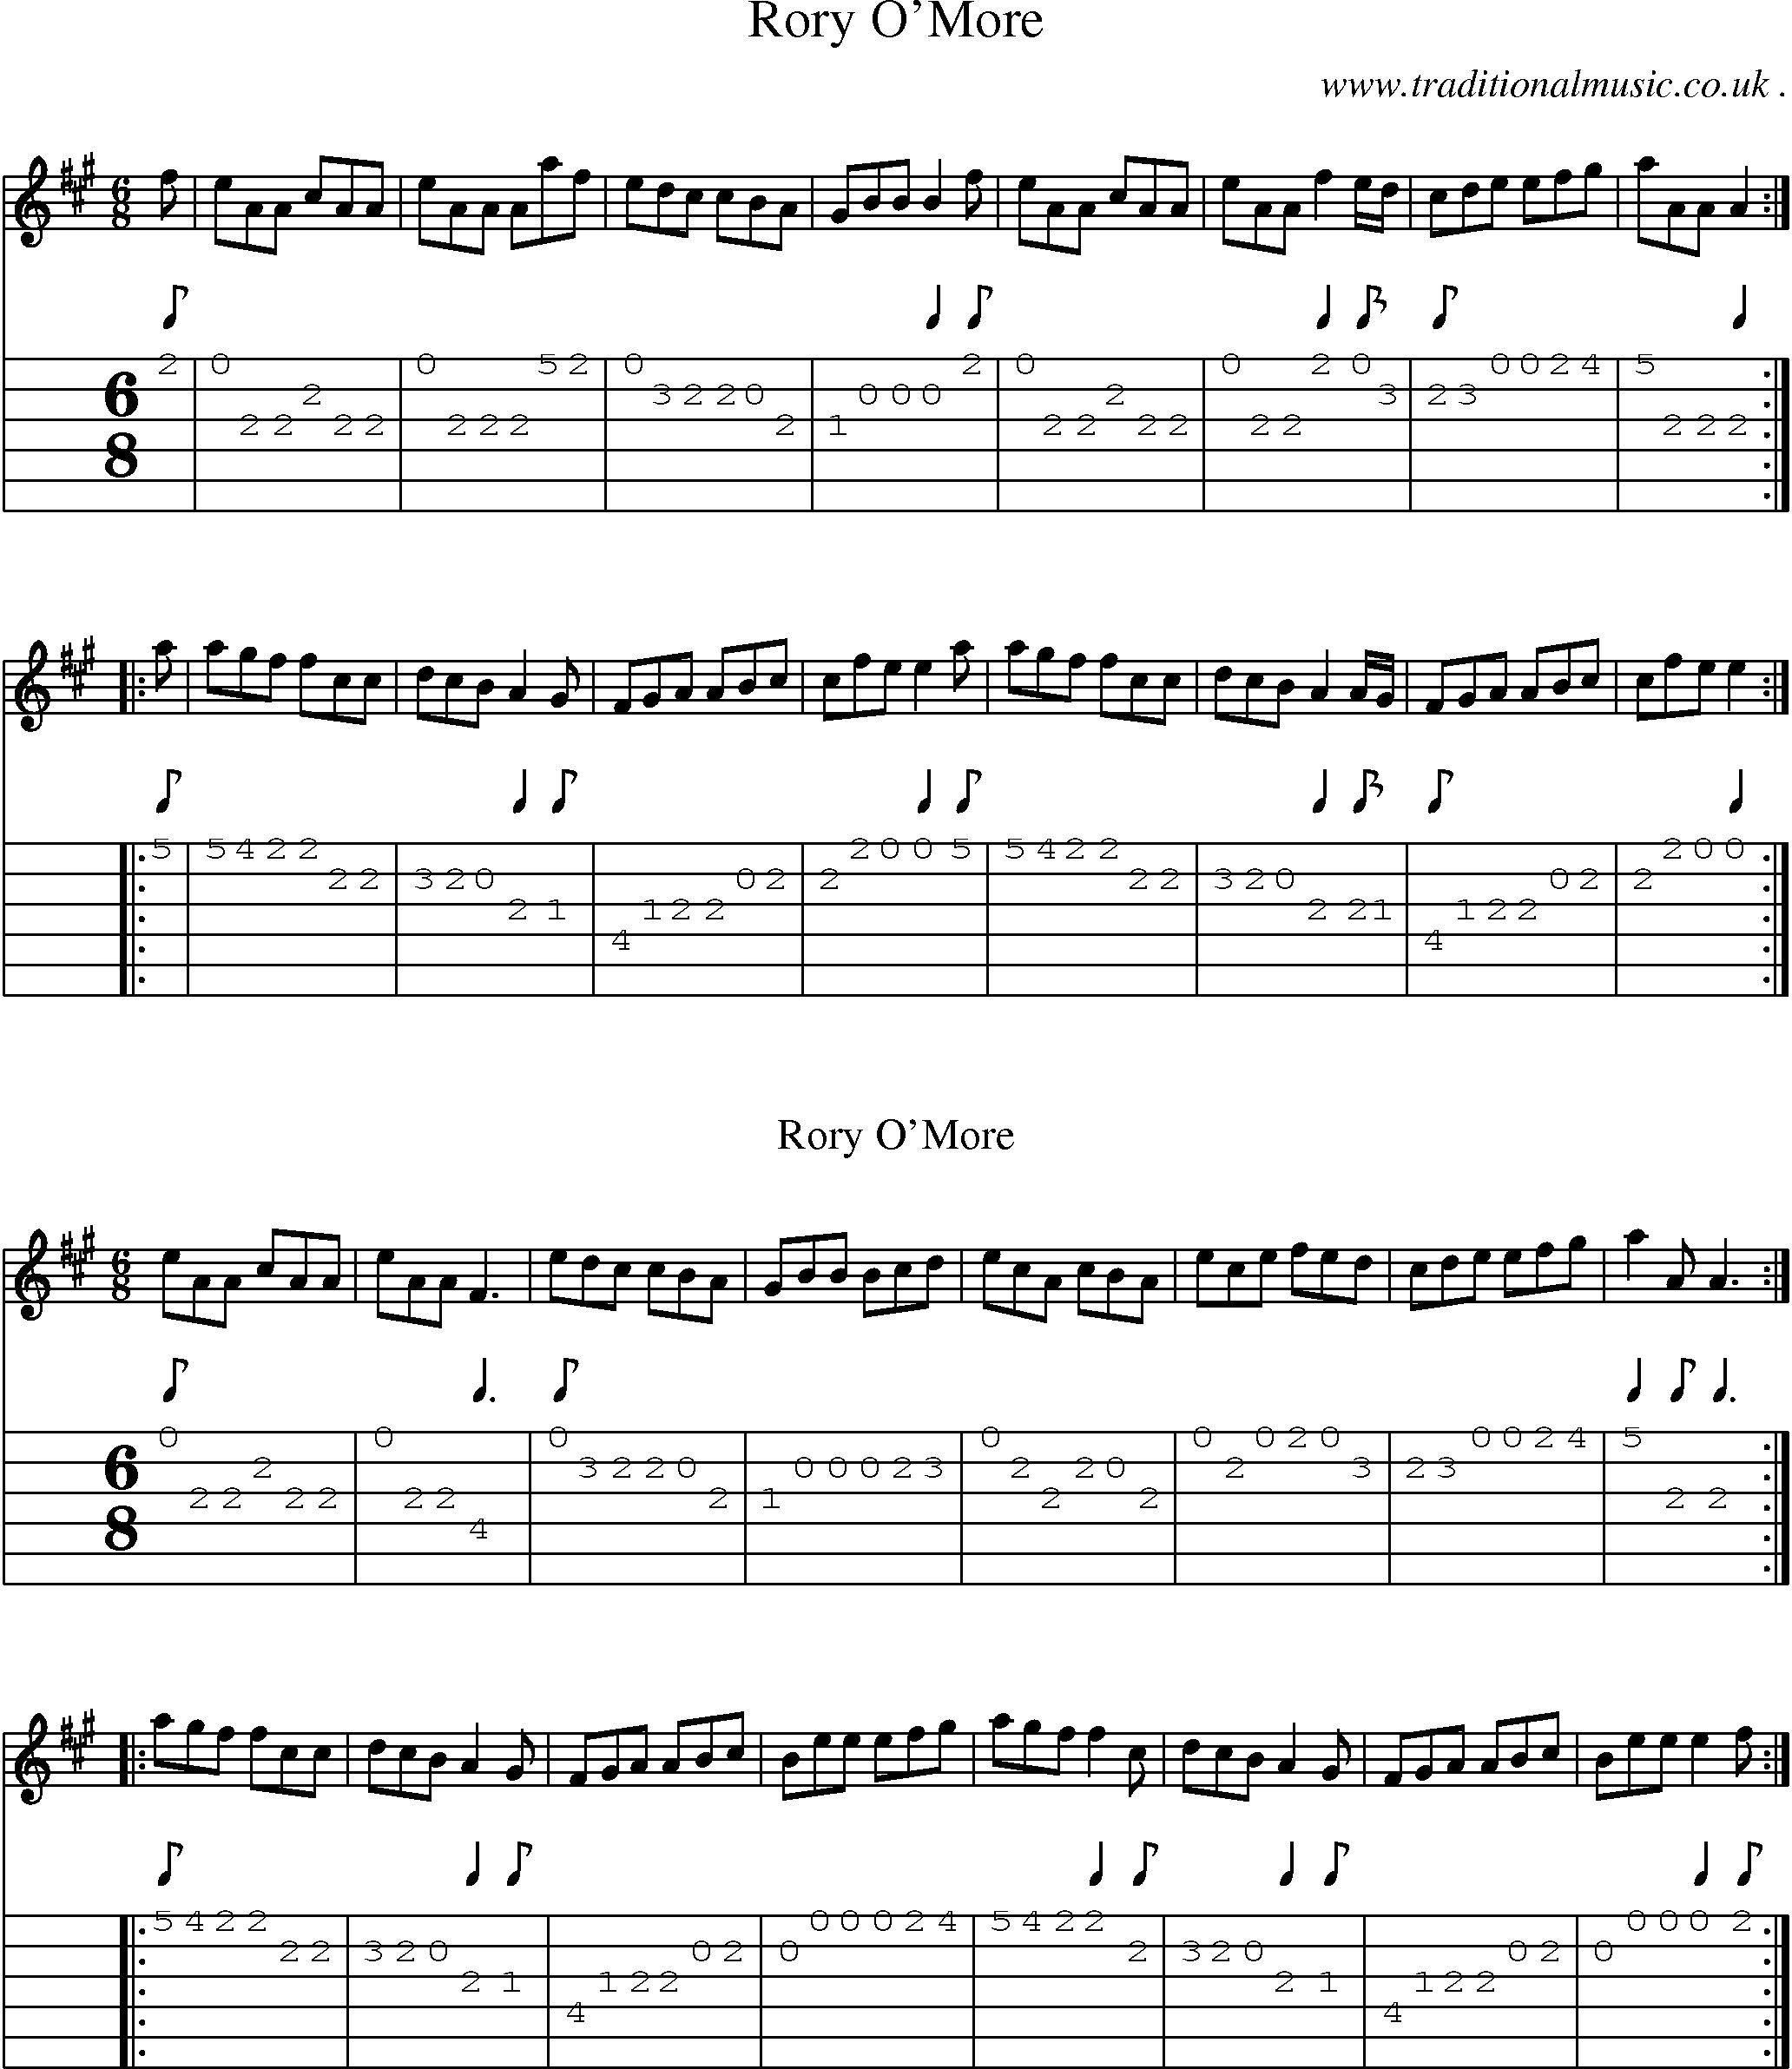 Sheet-music  score, Chords and Guitar Tabs for Rory Omore